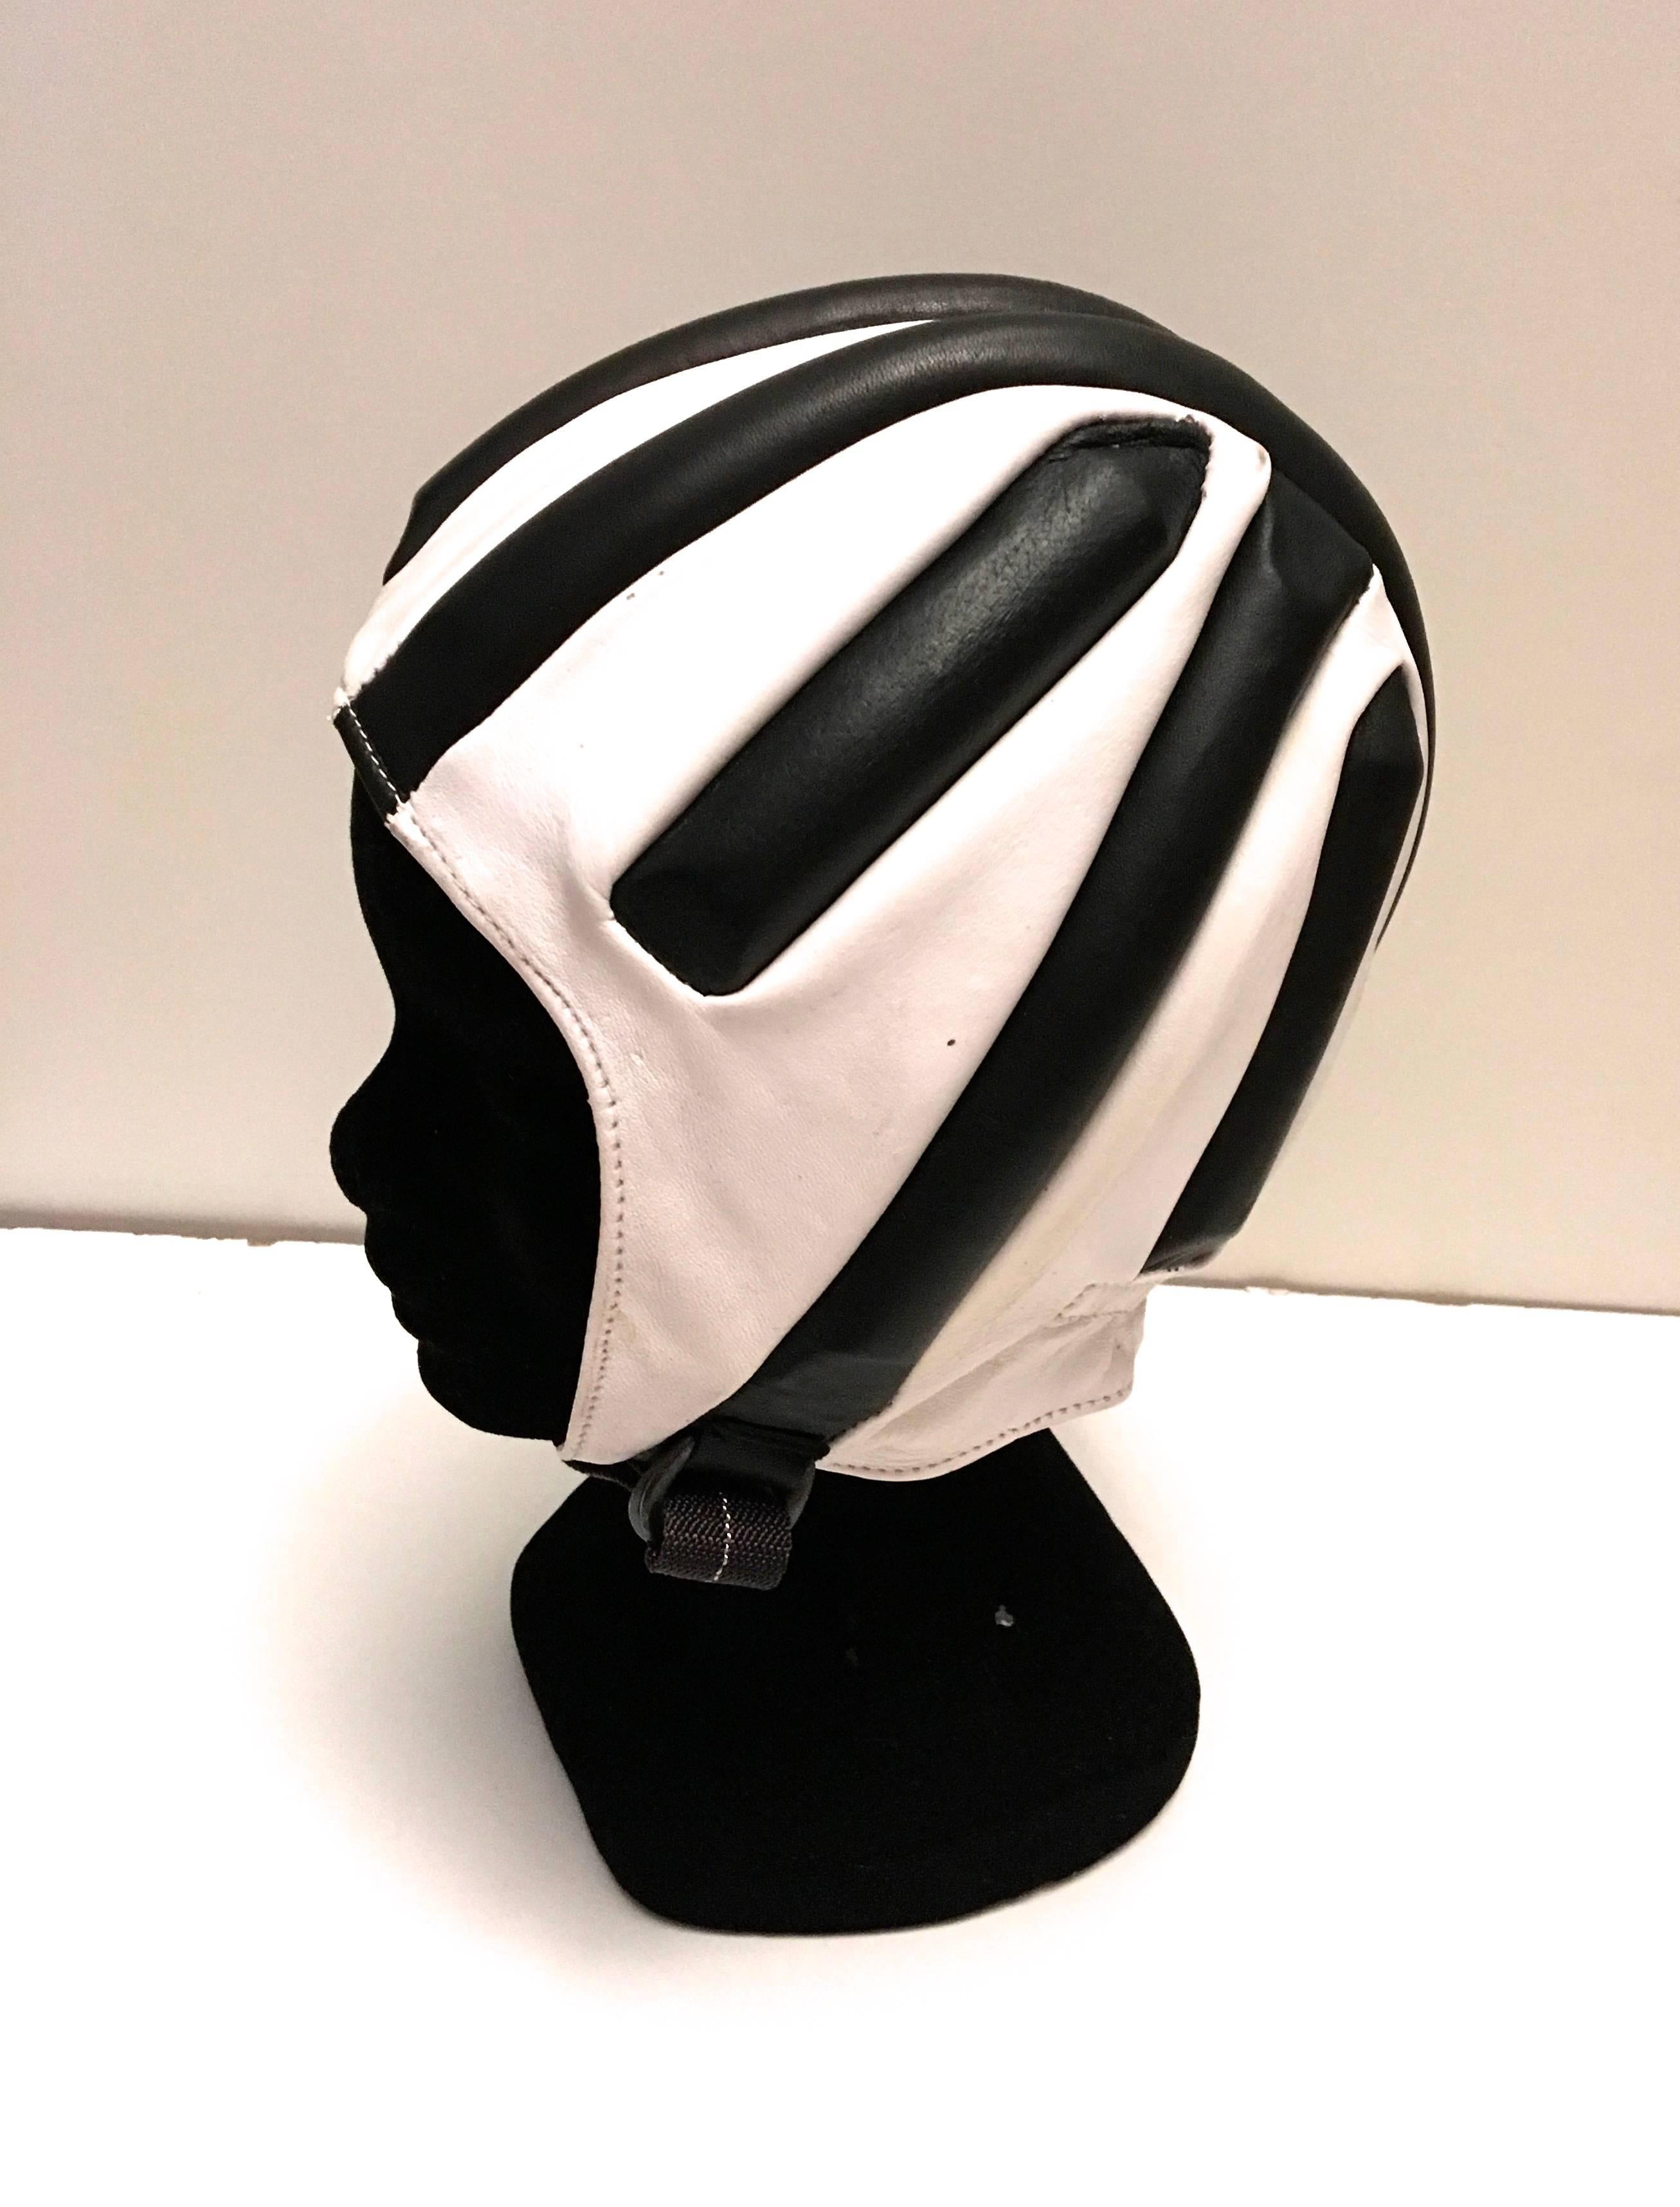 Presented here is a racing cap / helmet from the Italian manufacturer, Boeri. This fantastic helmet appear to have never been used. It still has its original box. The helmet is comprised of black and white leather with protective padding built